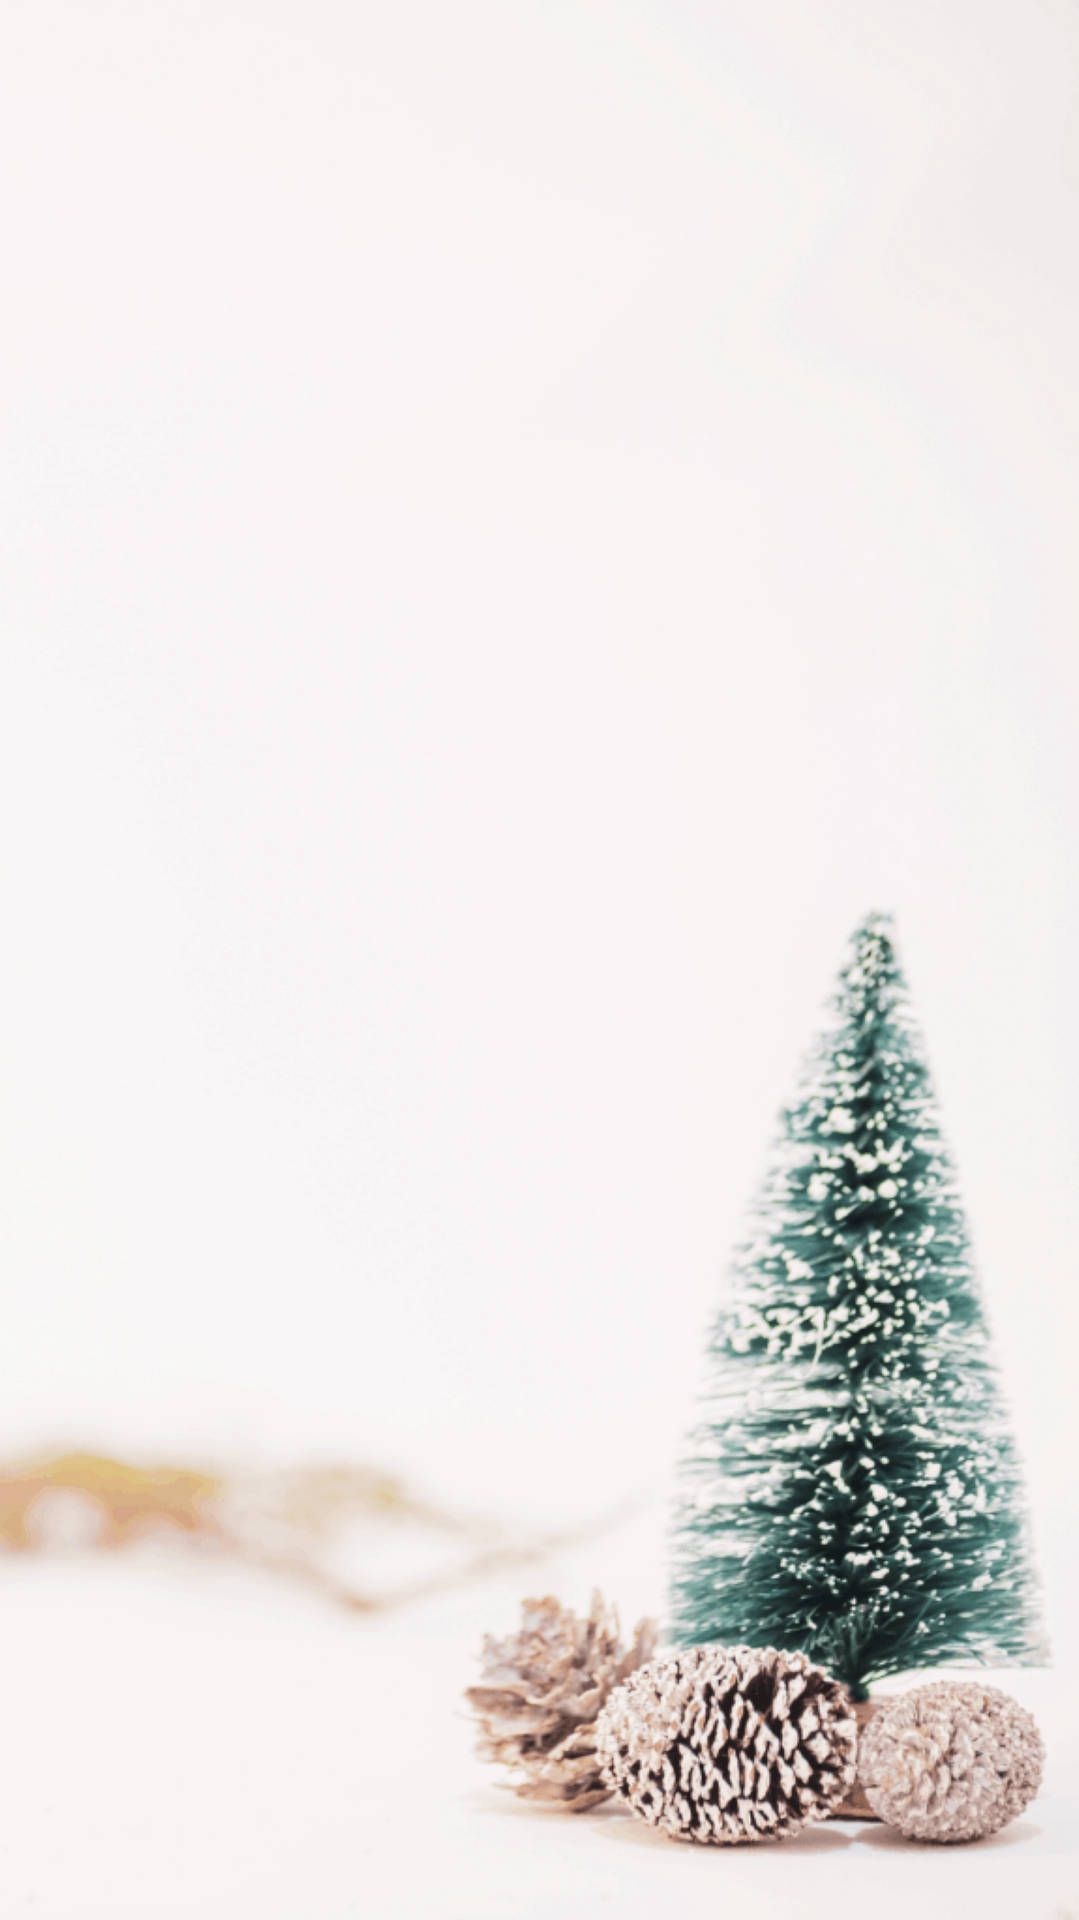 A white background with a small tree and pinecones in the foreground. - Christmas, white Christmas